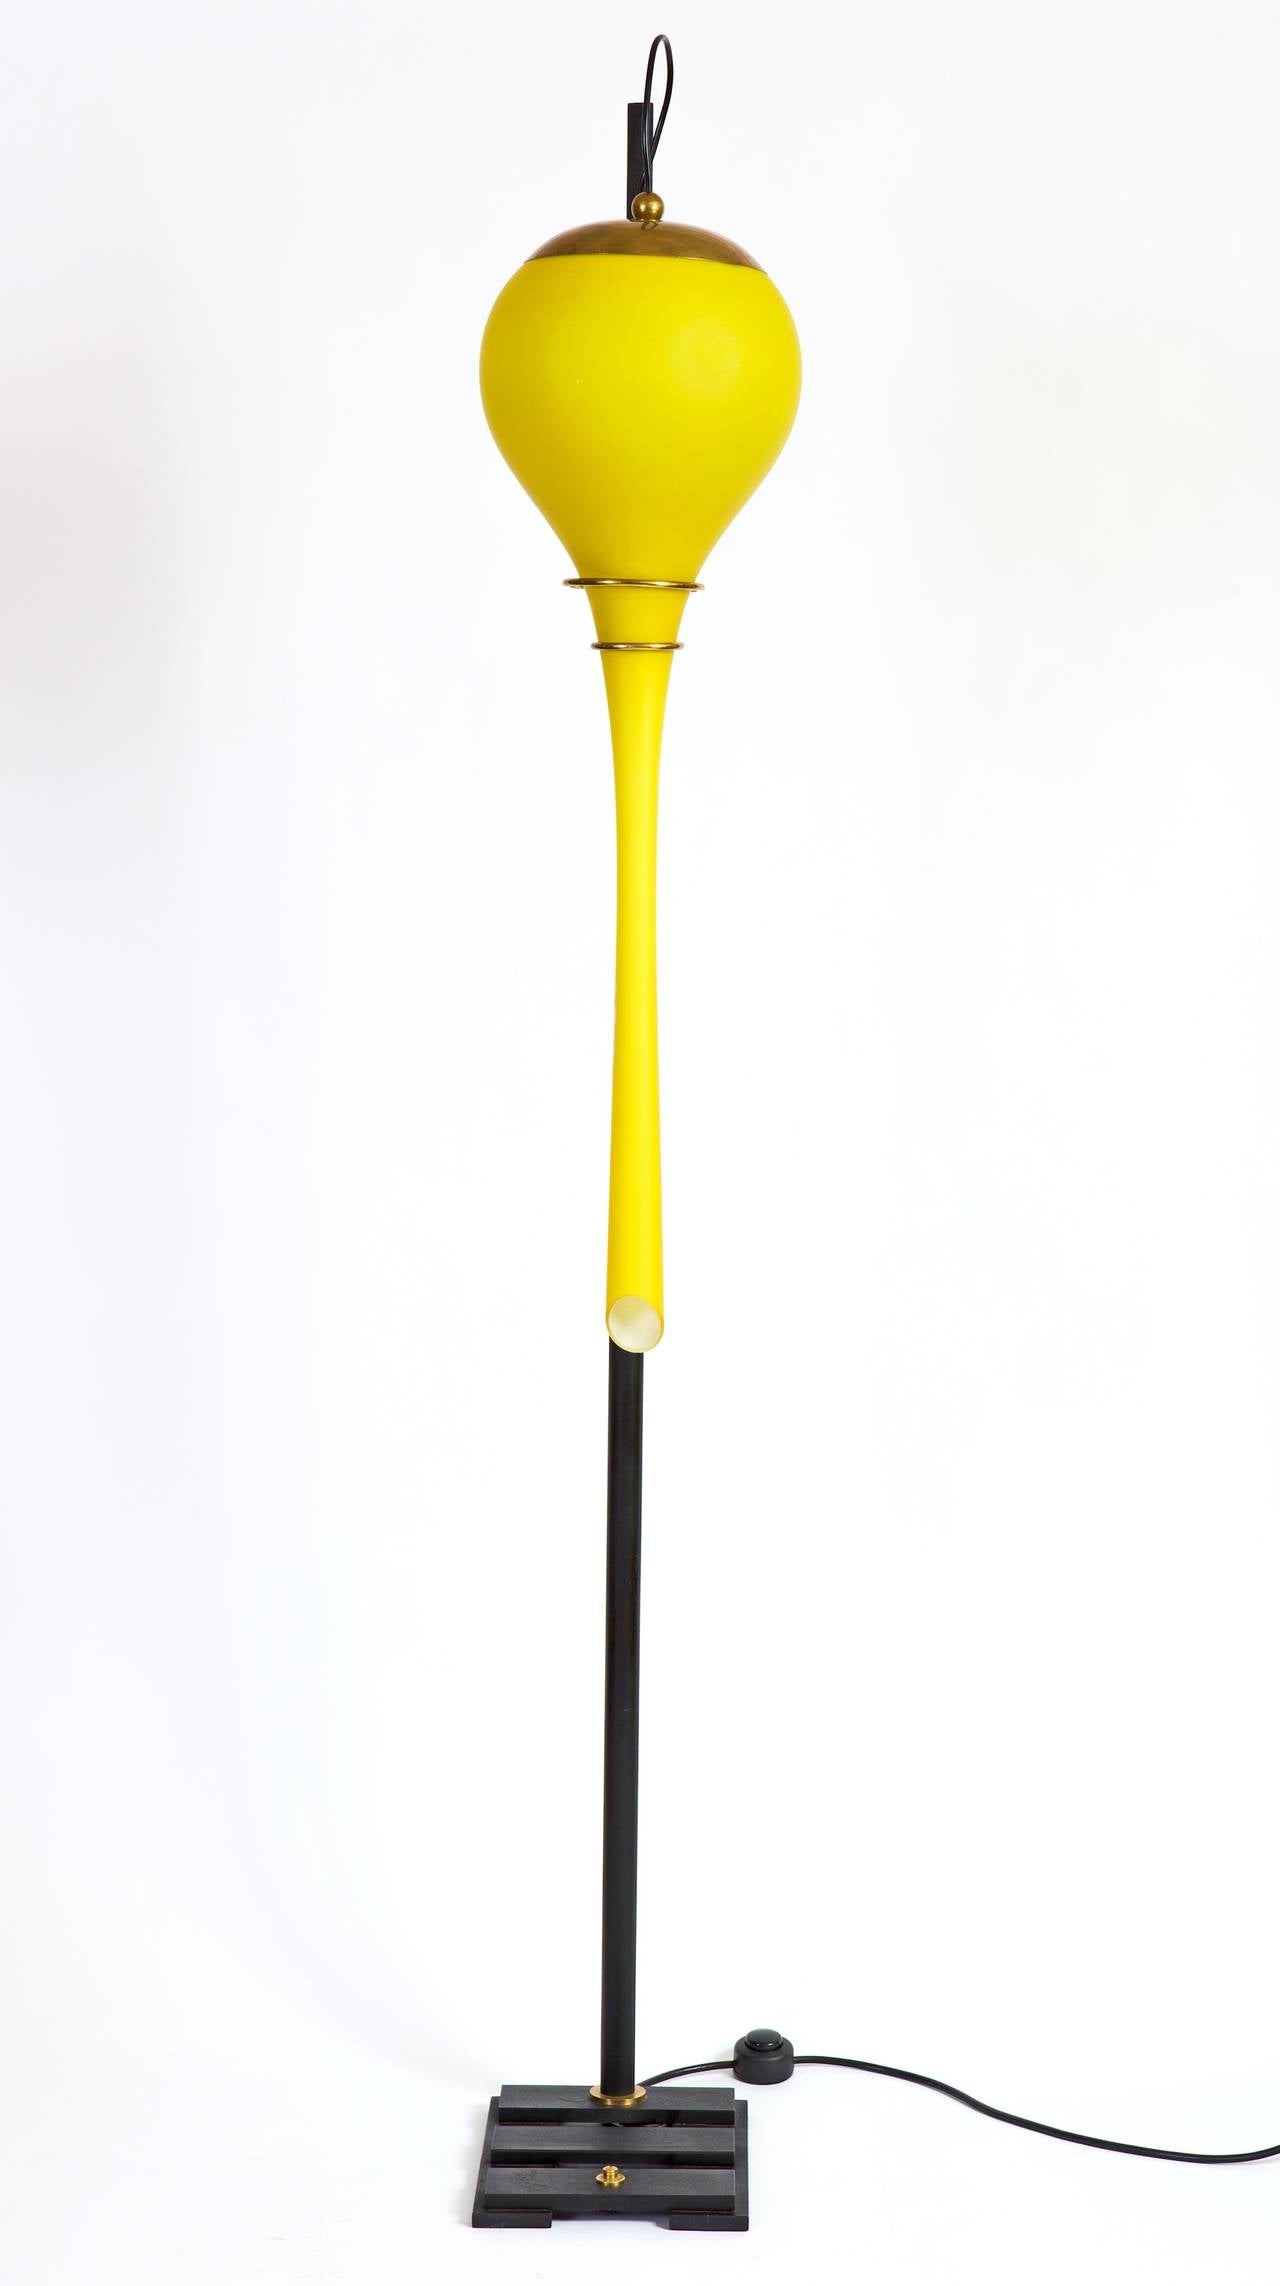 Dramatic 1950s stilnovo floor lamp with extra large yellow glass shade with brass cap and black patinated base with brass detailing. Striking piece!

Measure: Shade is 33